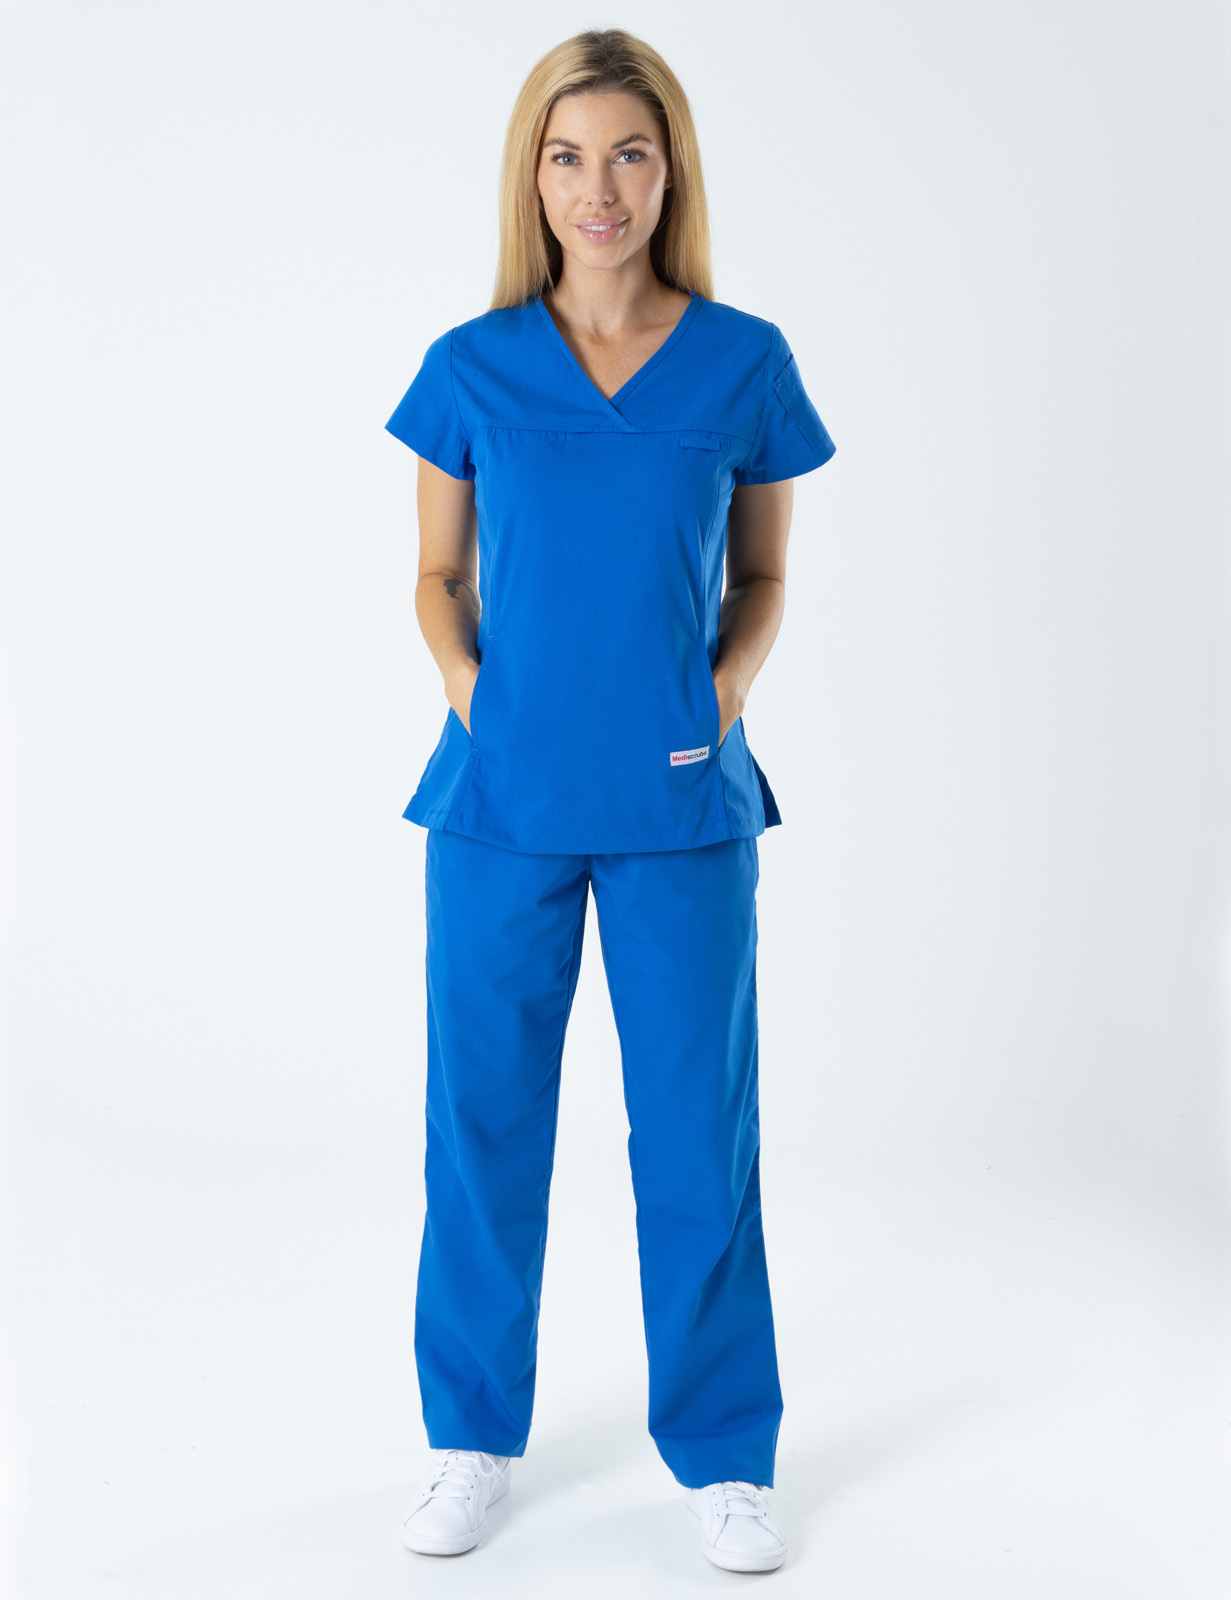 Women's Fit Solid Scrub Top - Royal - 4X large